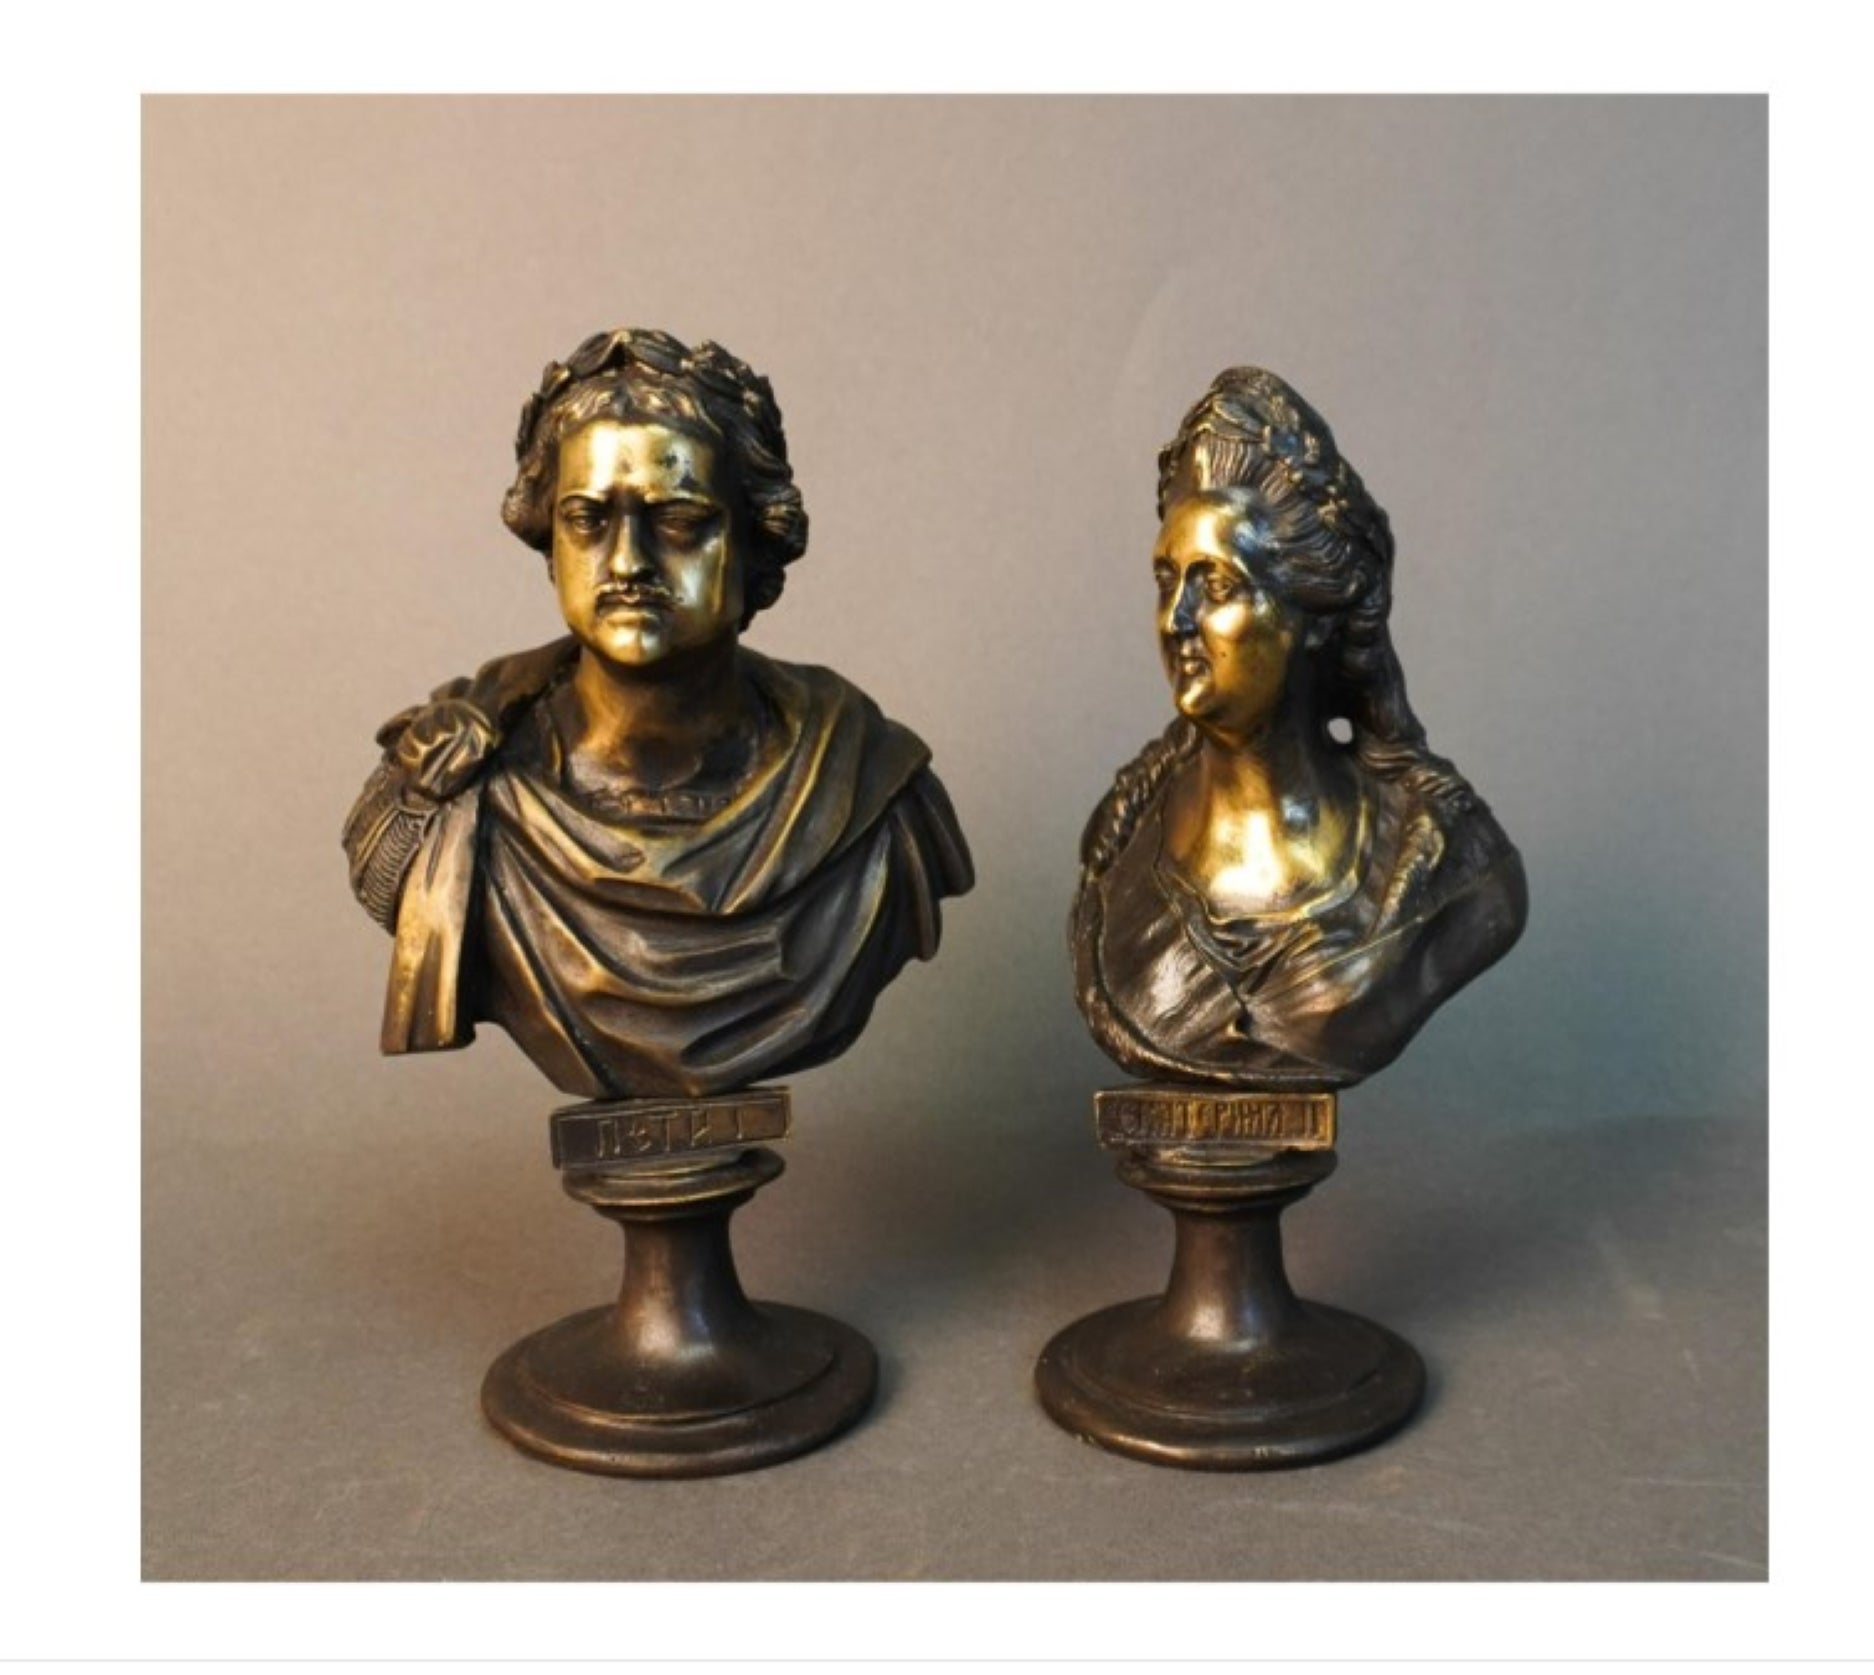 Rare Pair of 19th Russian Bronze Busts of Peter I and Catherine the Great in great antique condition. Marked 1867